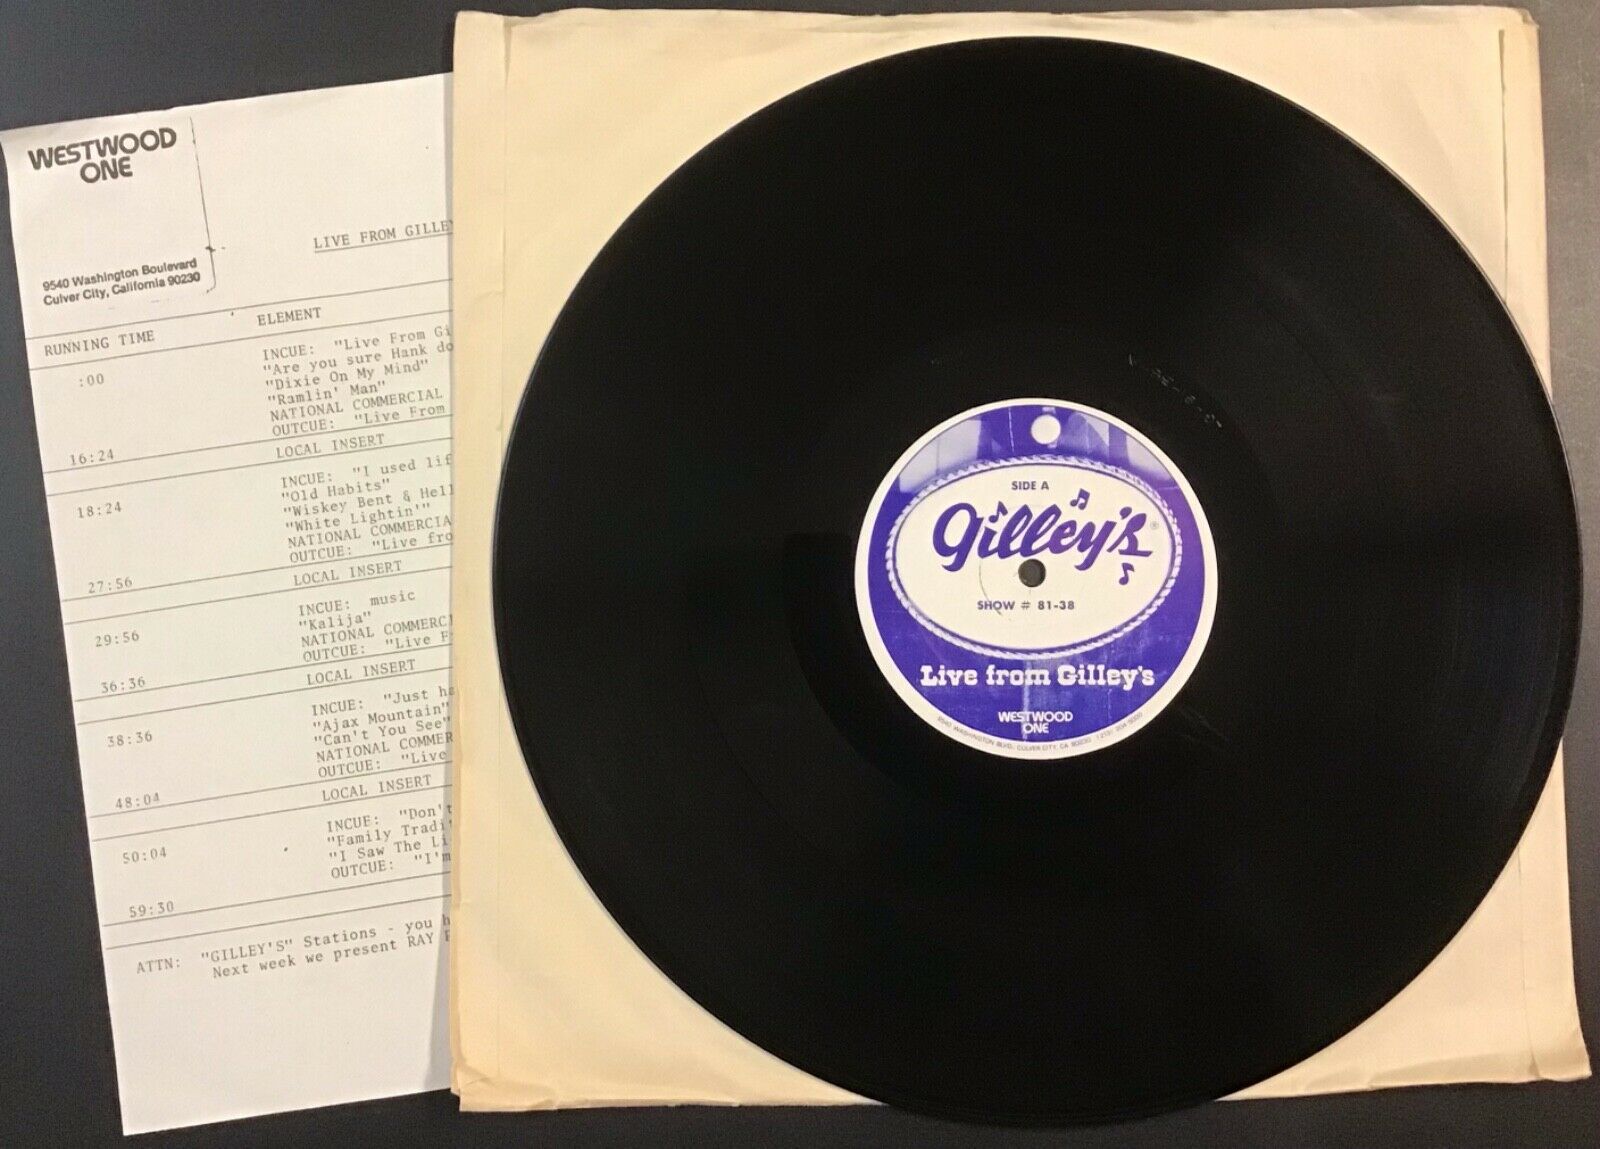 popsike.com - HANK WILLIAMS JR Live from Gilley's RARE Vinyl LP VG+ # 81-38  Hank Done It This - auction details